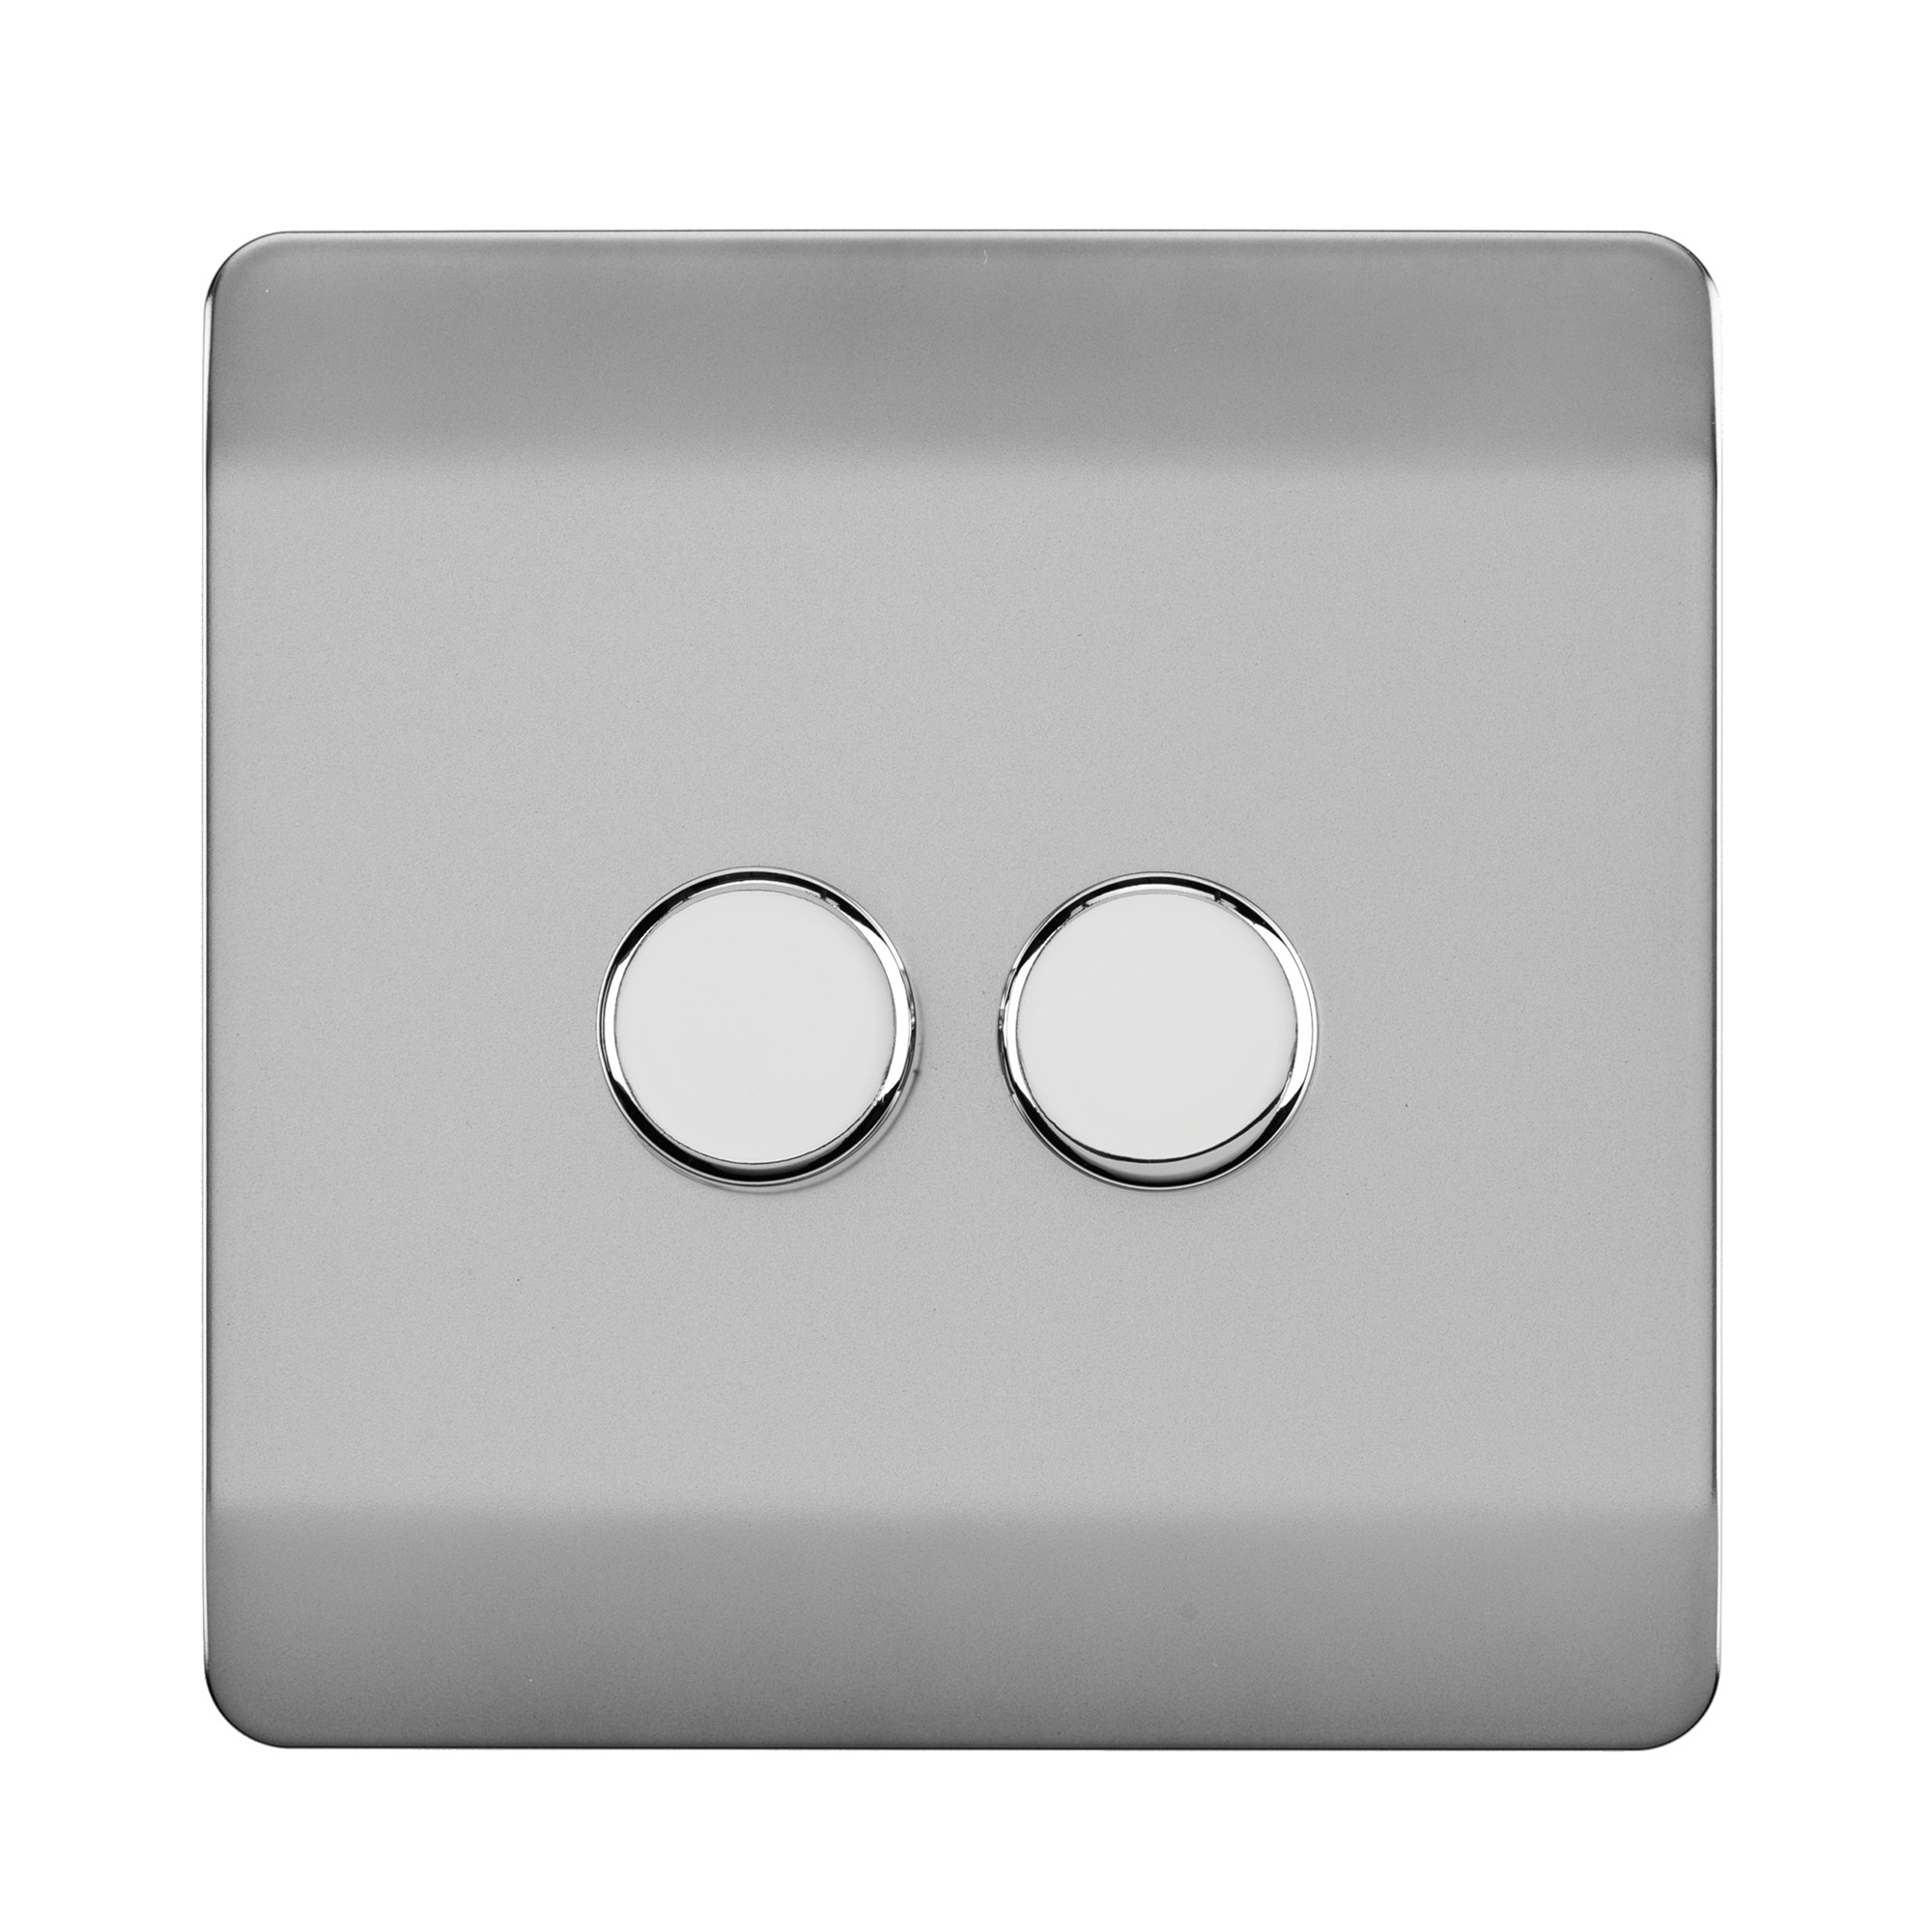 ART-2LDMBS  2 Gang 2 Way LED Dimmer Switch Brushed Steel